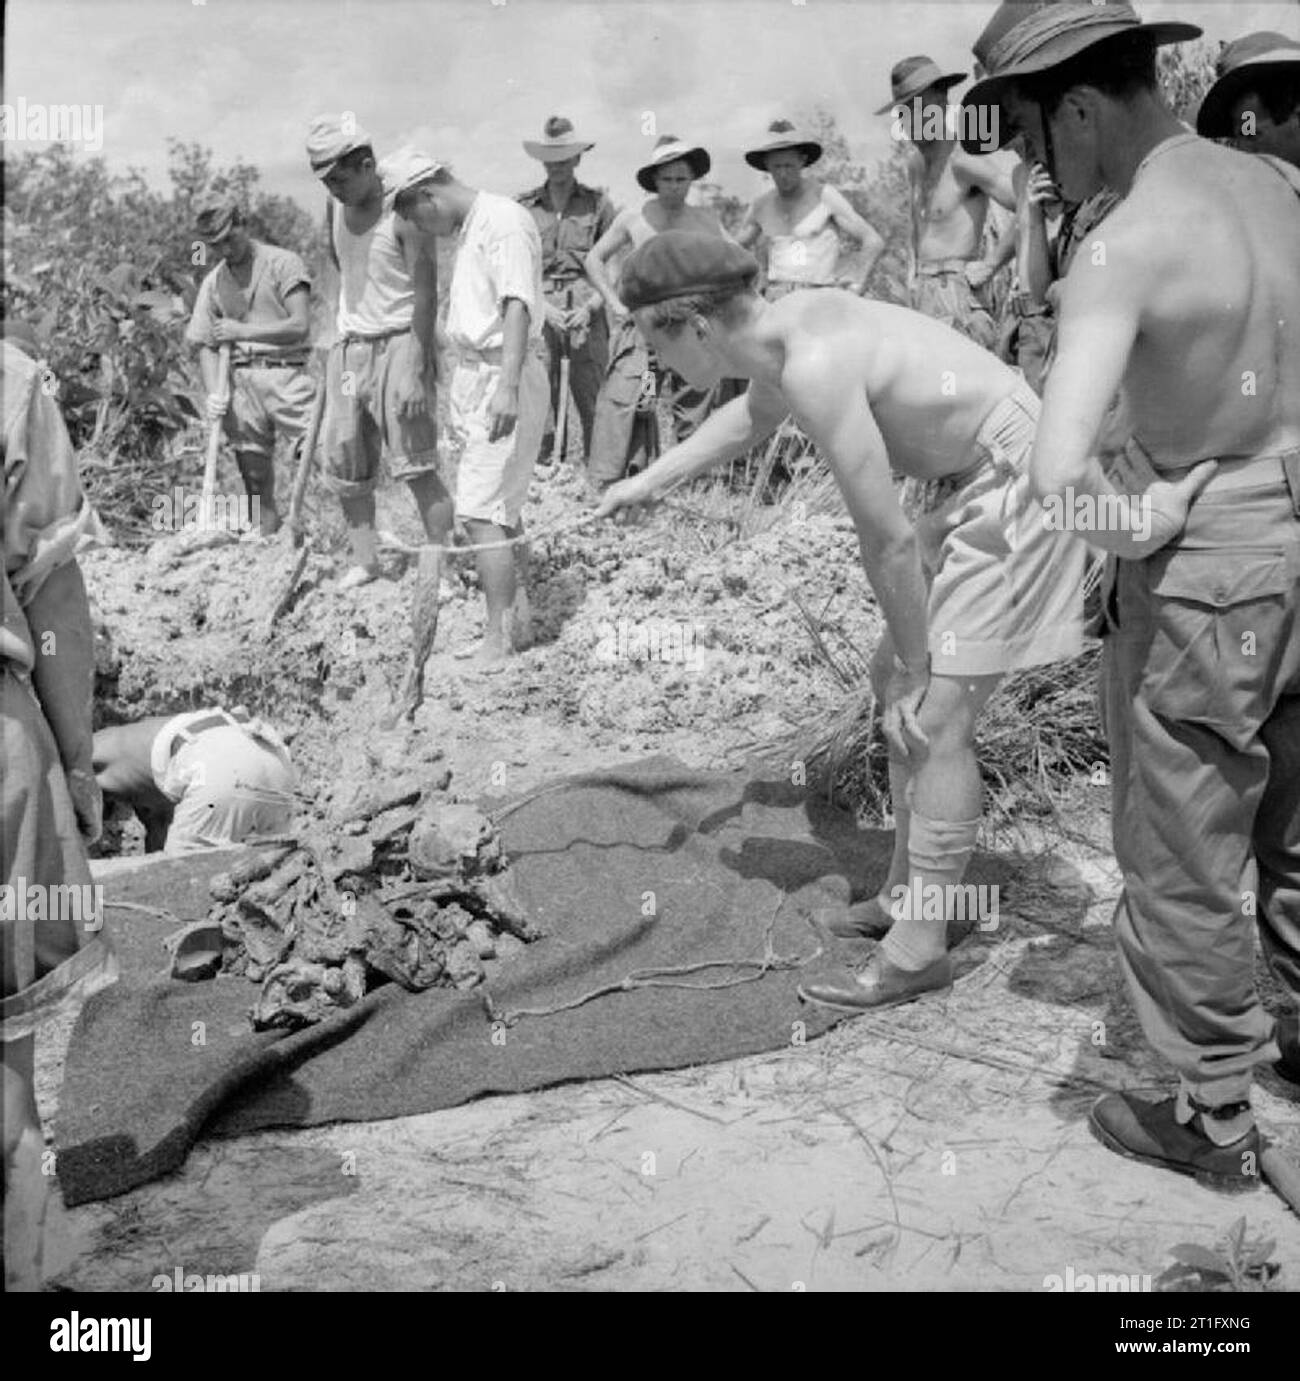 The British Reoccupation of Singapore Captain R S Ross of the Royal Army Medical Corps examines a piece of cloth found with the body of an Allied prisoner of war exhumed by Japanese prisoners during a search for evidence of Japanese atrocities for the war crimes trials held at Singapore. It was thought the piece of cloth may have been used as a blindfold prior to the man being executed. Stock Photo